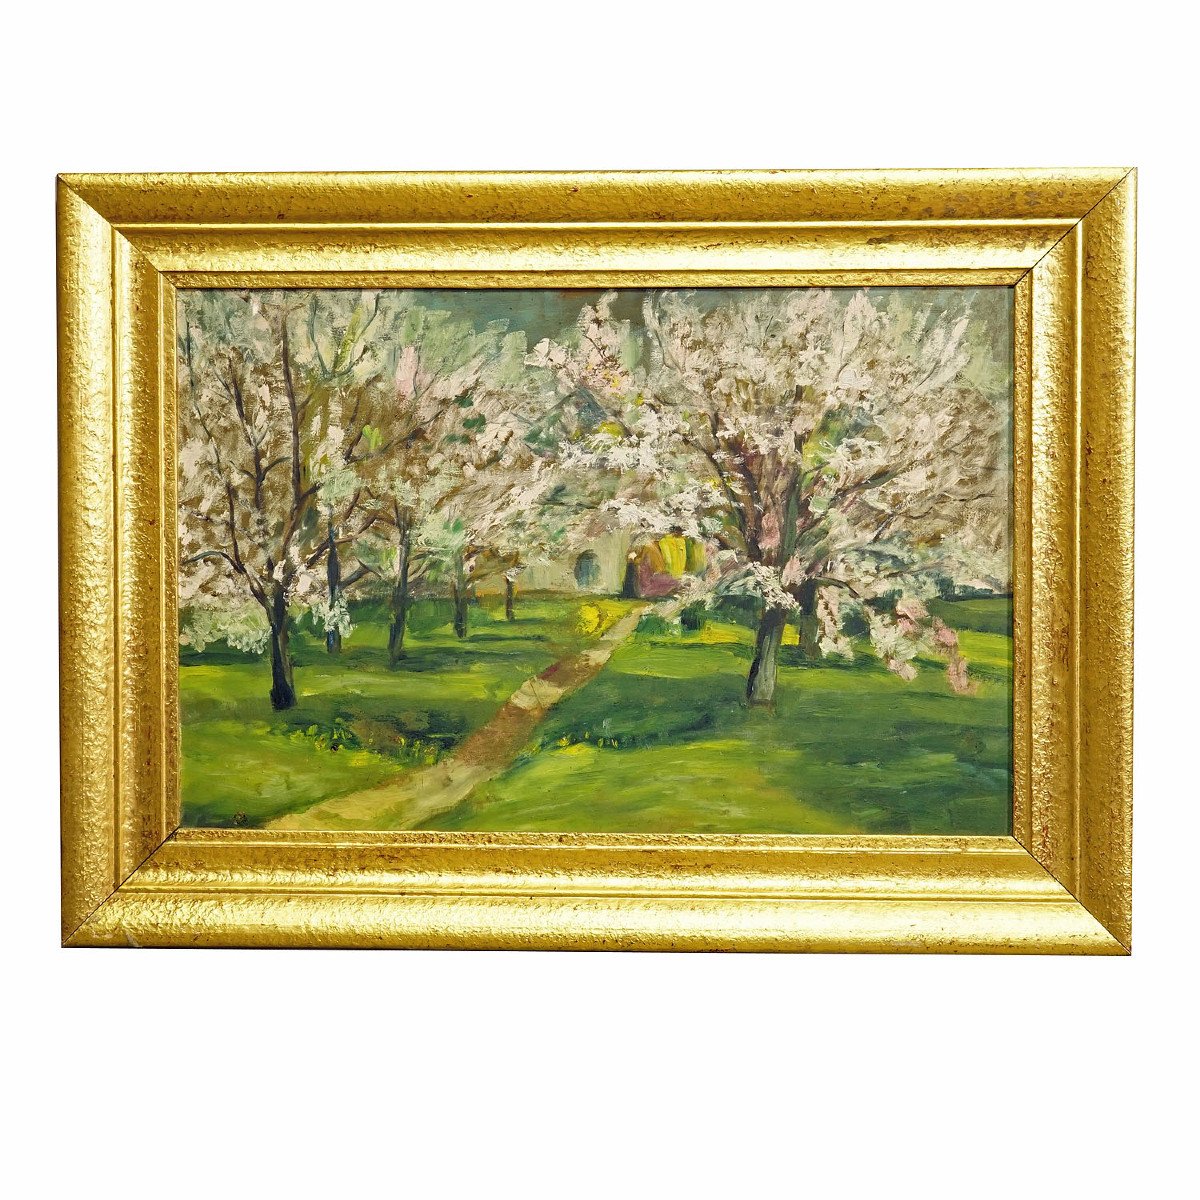 Impressionist Painting Of A Garden With Apple Trees In Bloom